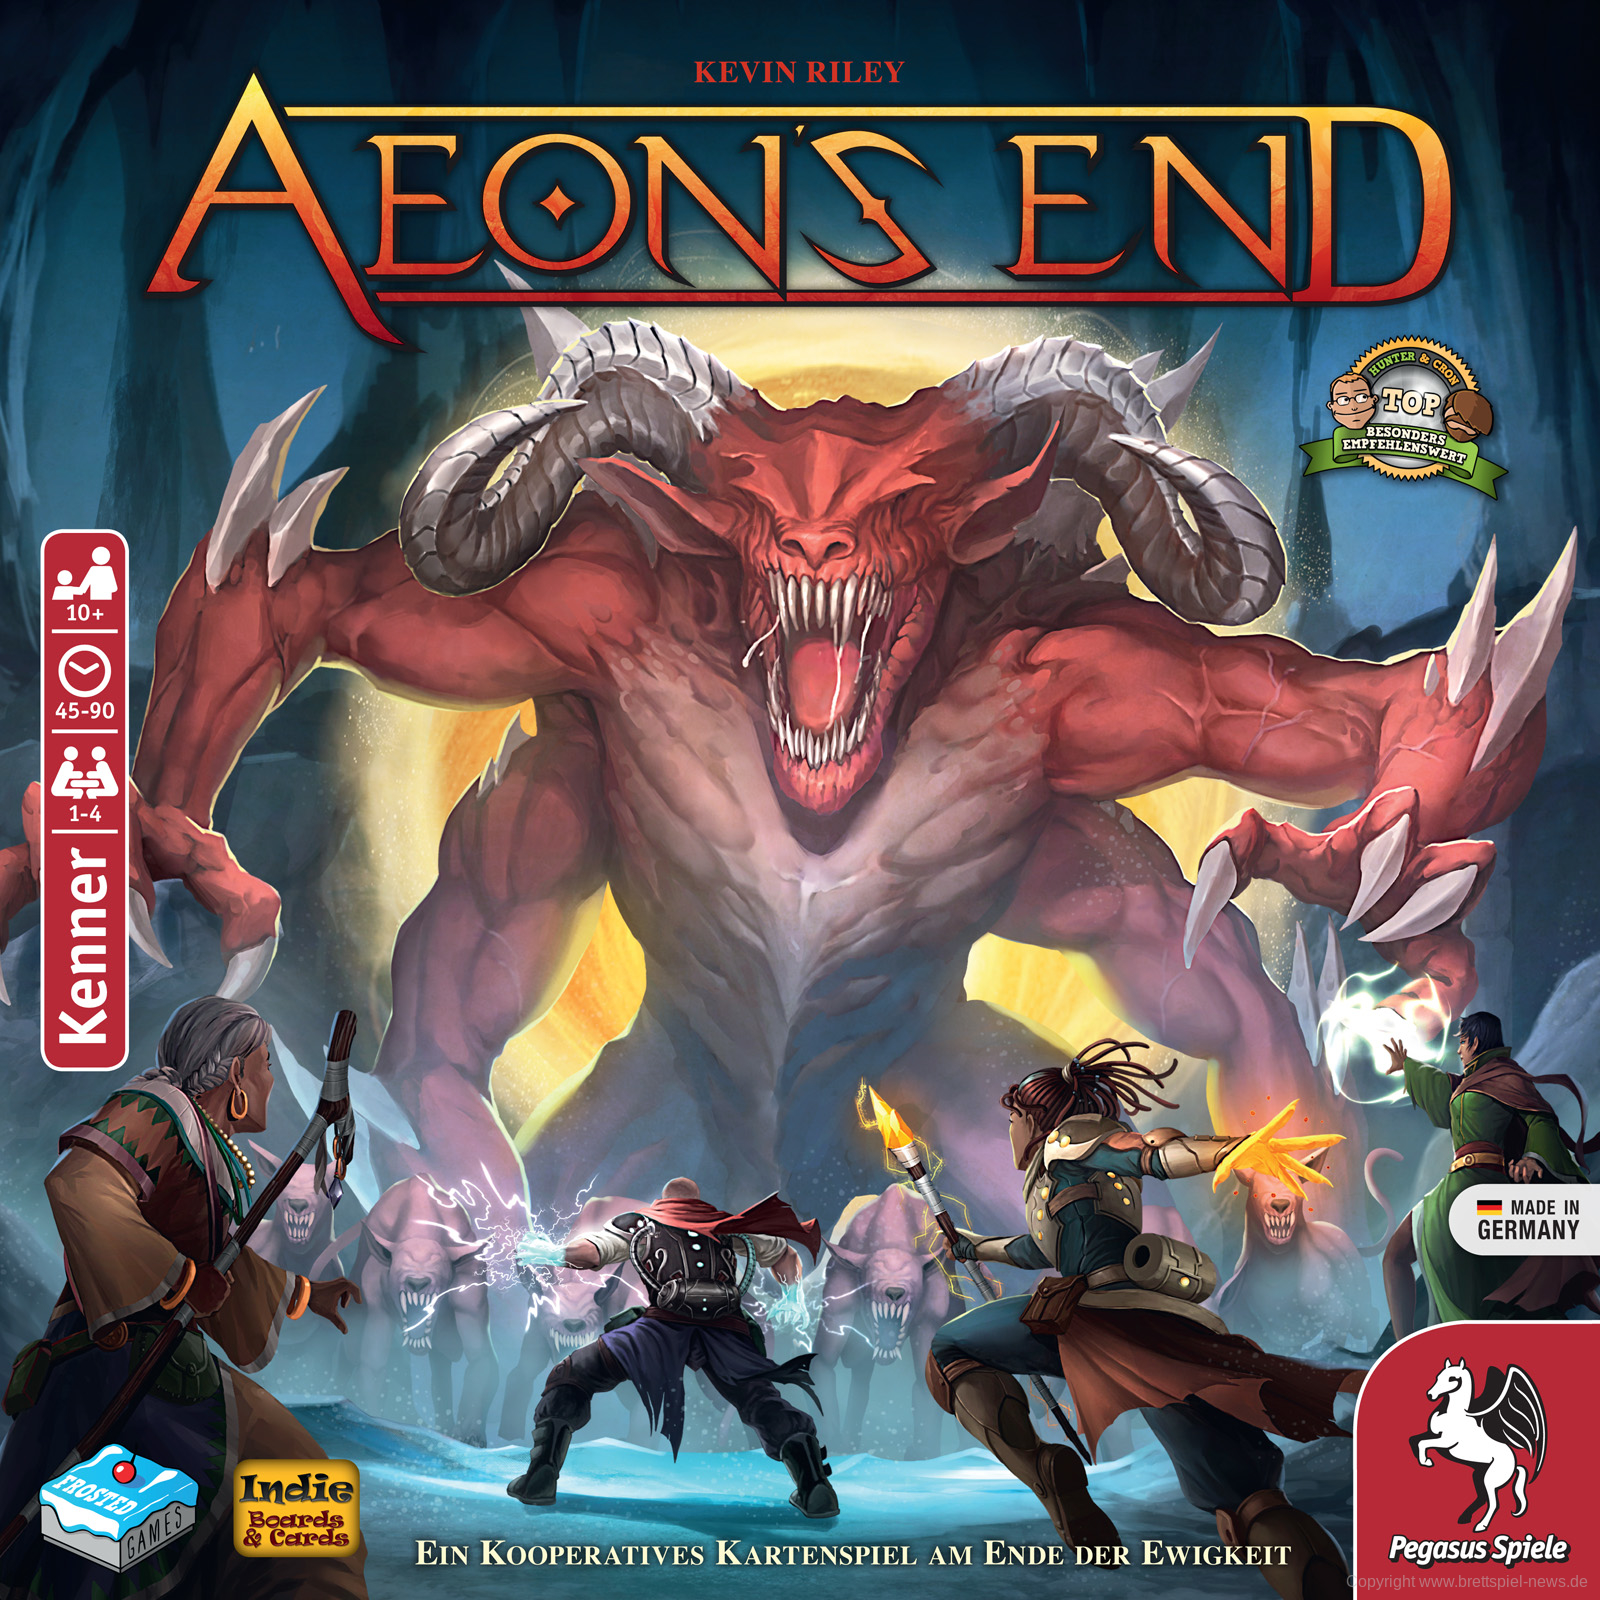 AEons END cover